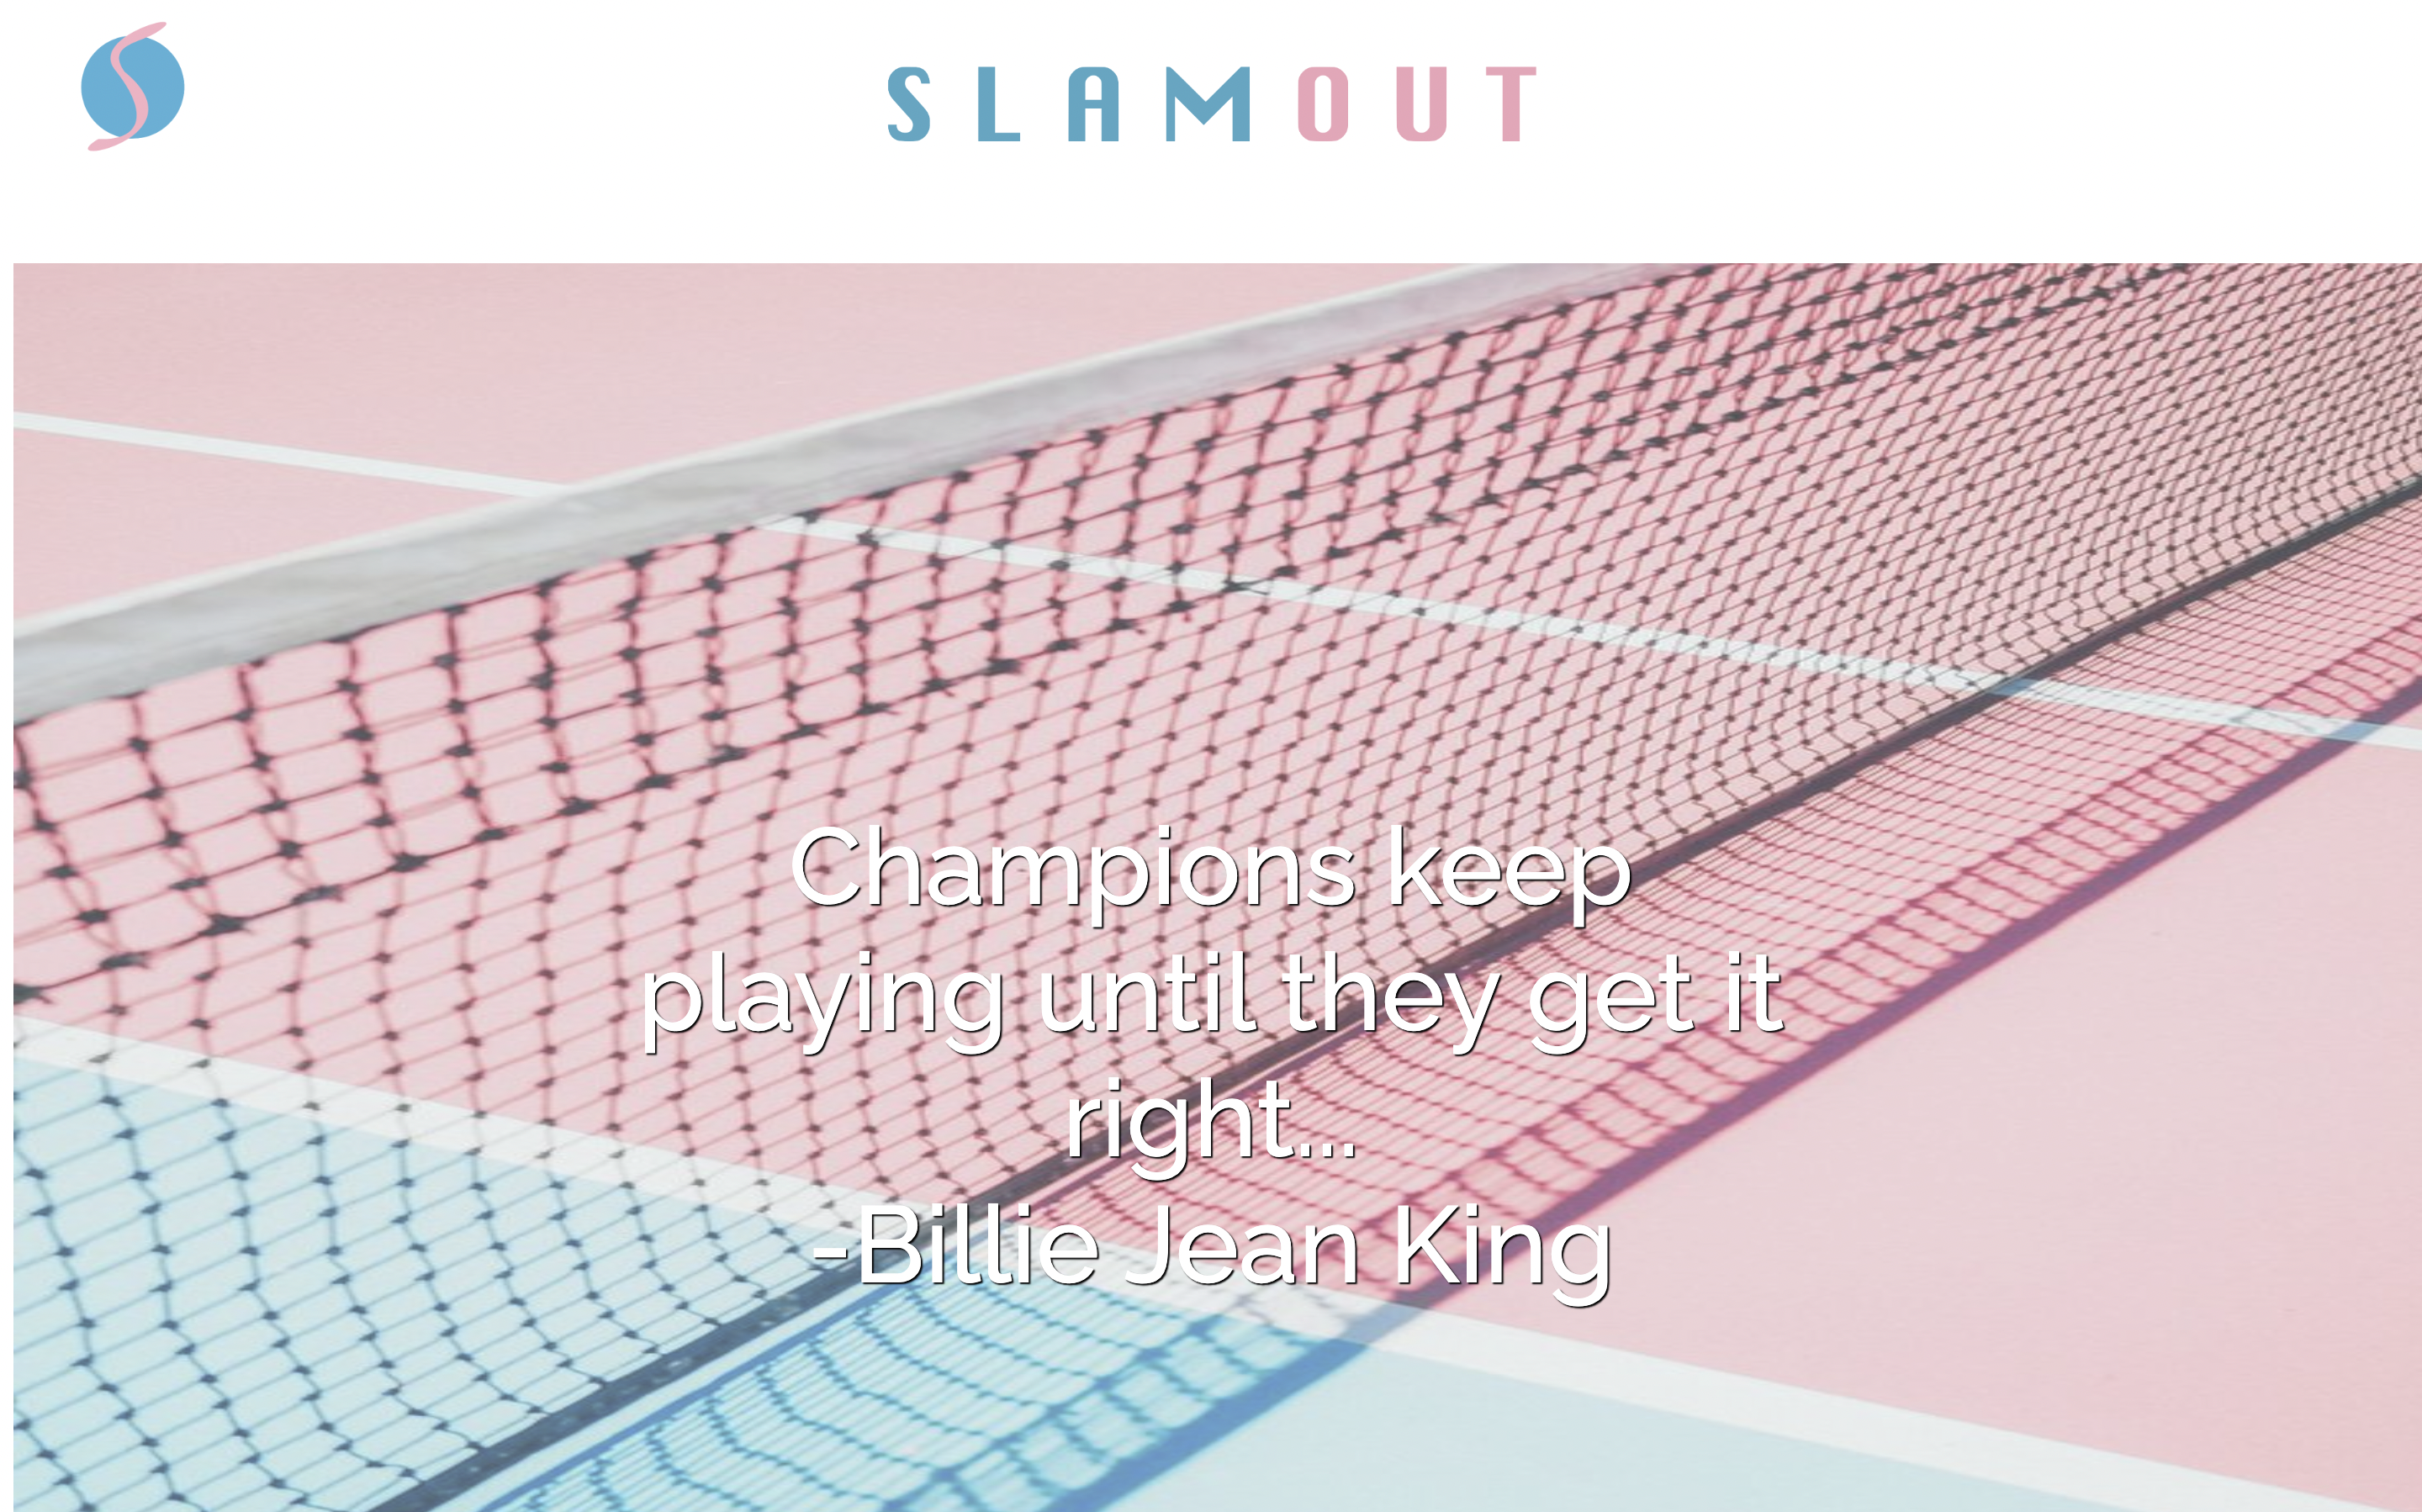 SLAMOUT - a mockup webshop build with html and css